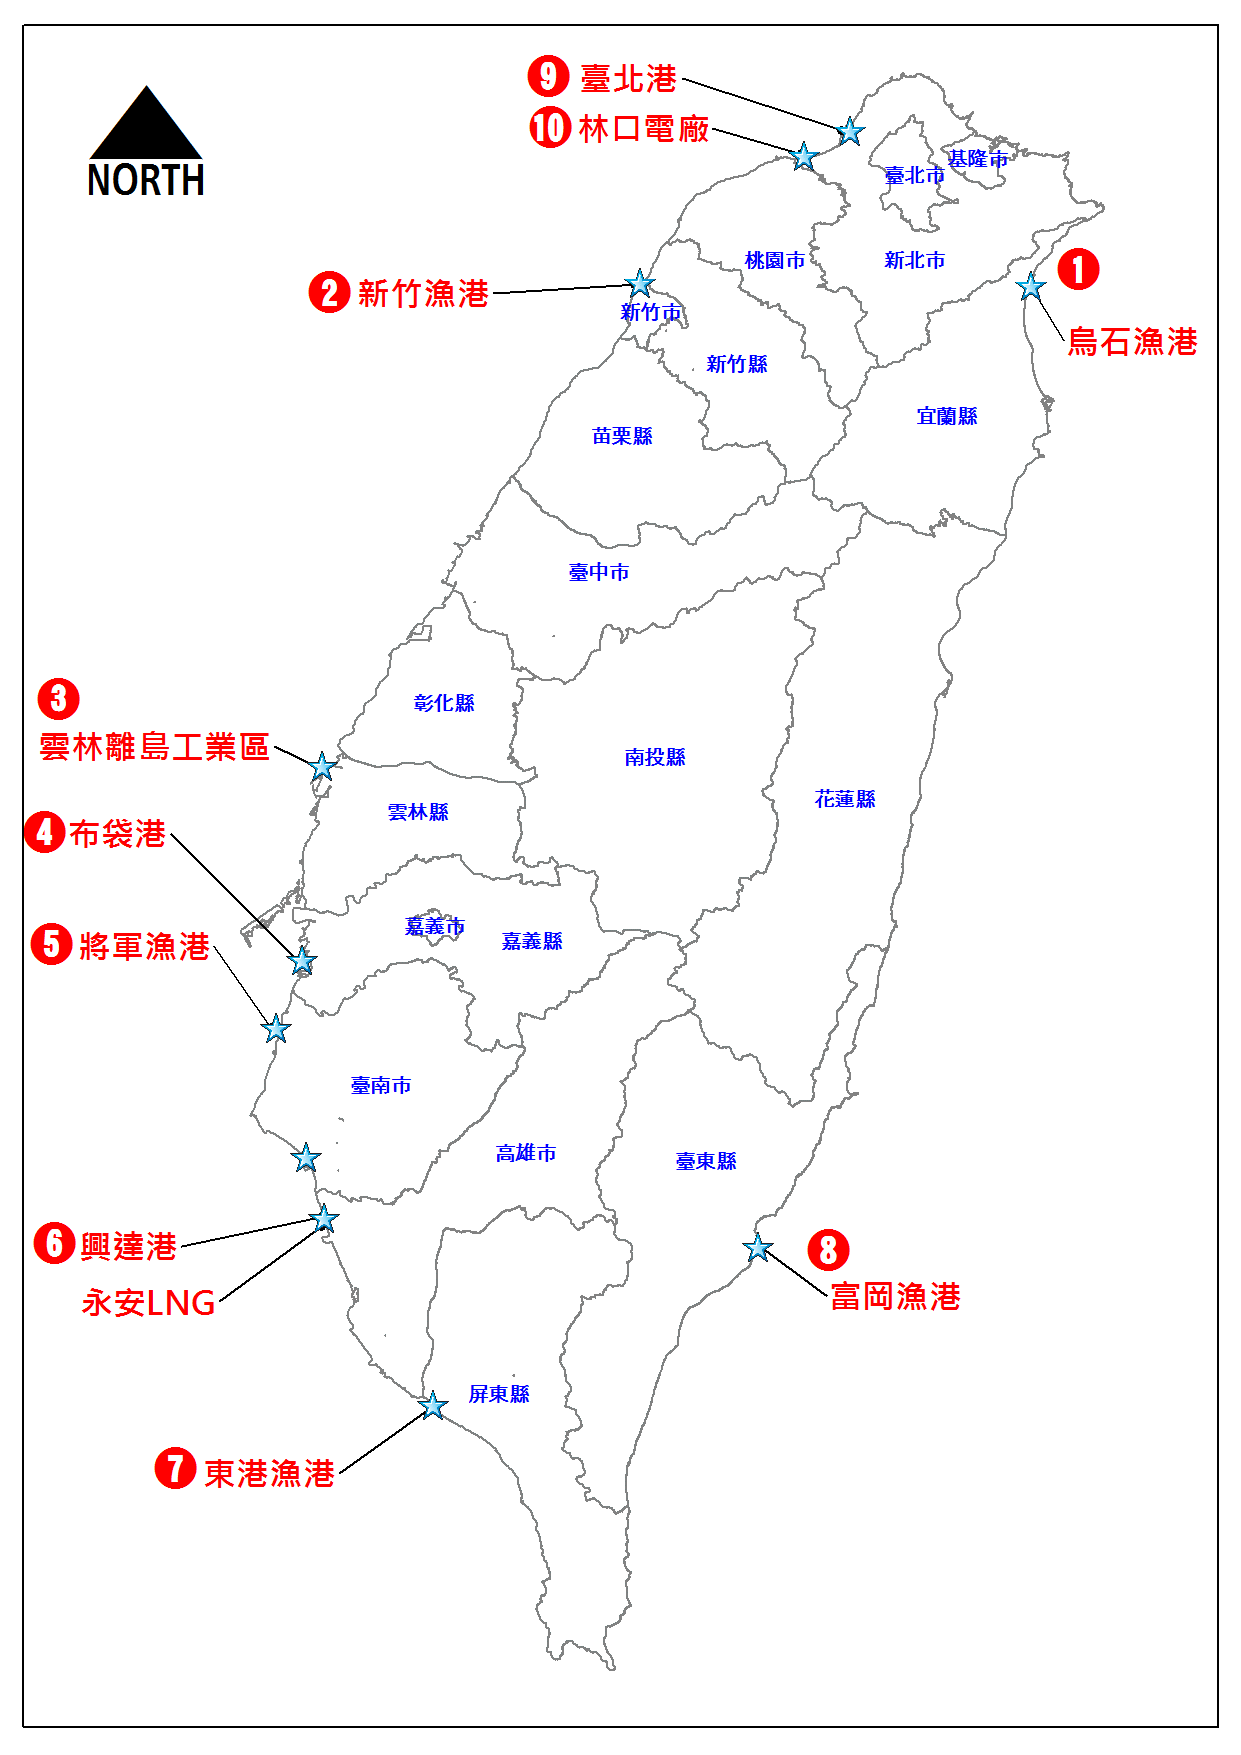 Figure.1 10 places of coastal erosion according to the behavior of coastal zoom development in Taiwan are selected to analysis.